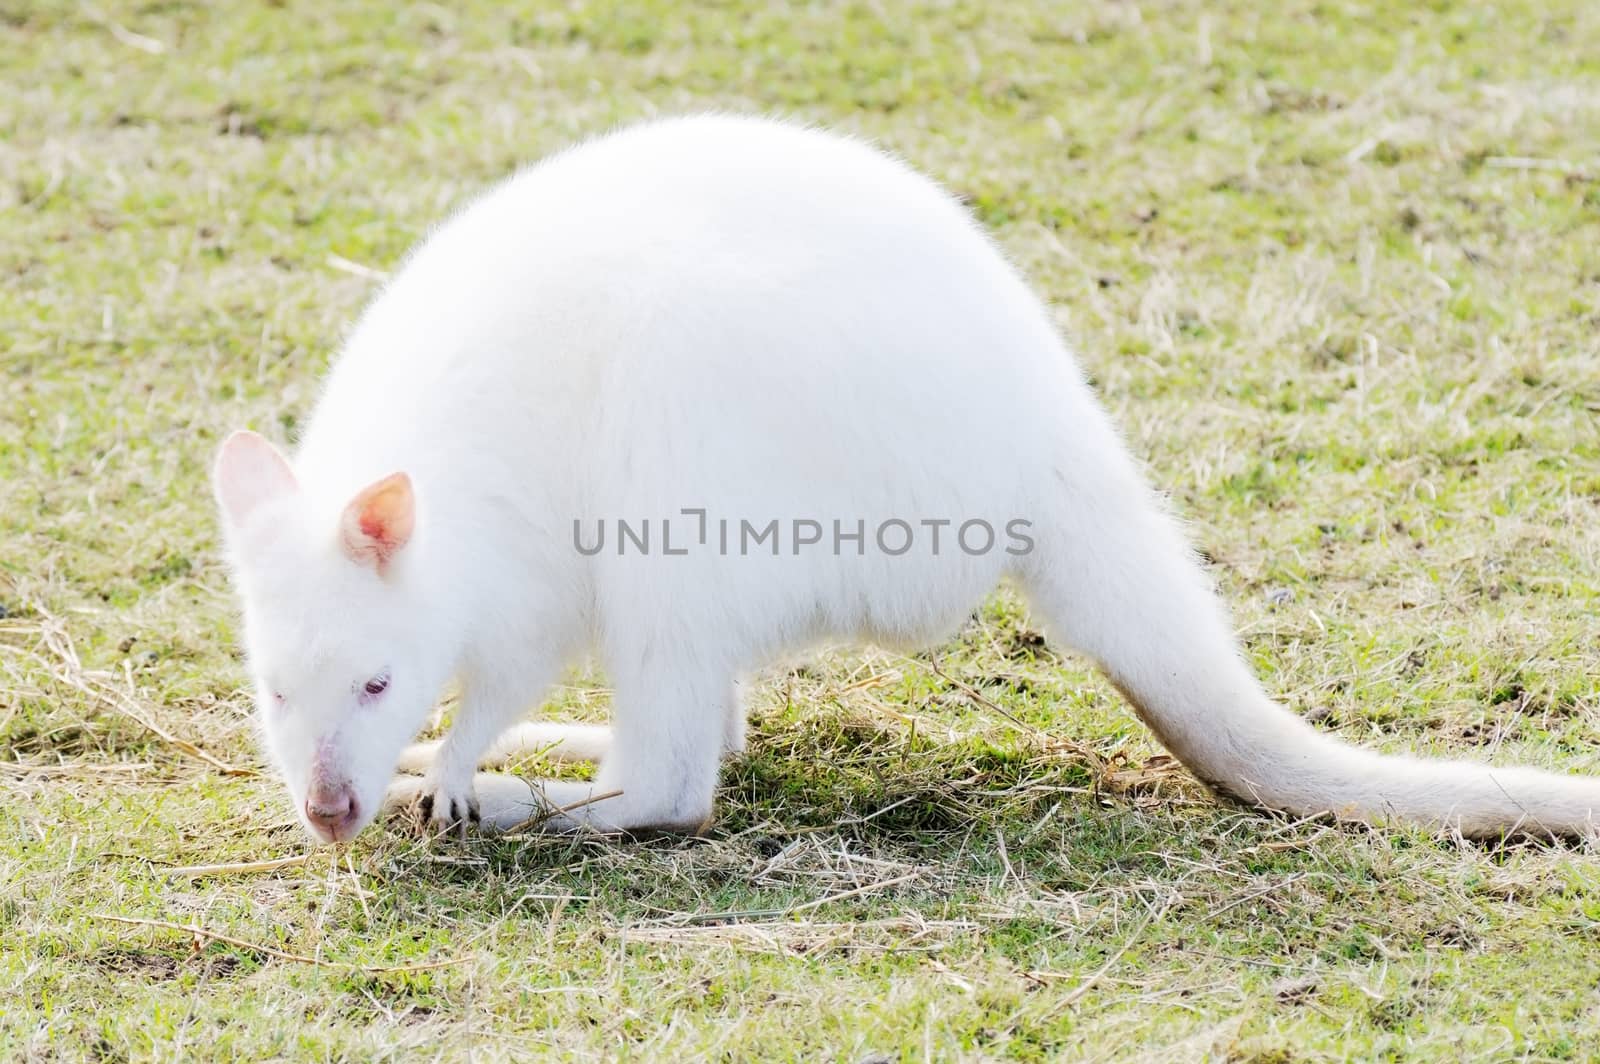 Albino Wallaby eating by kmwphotography